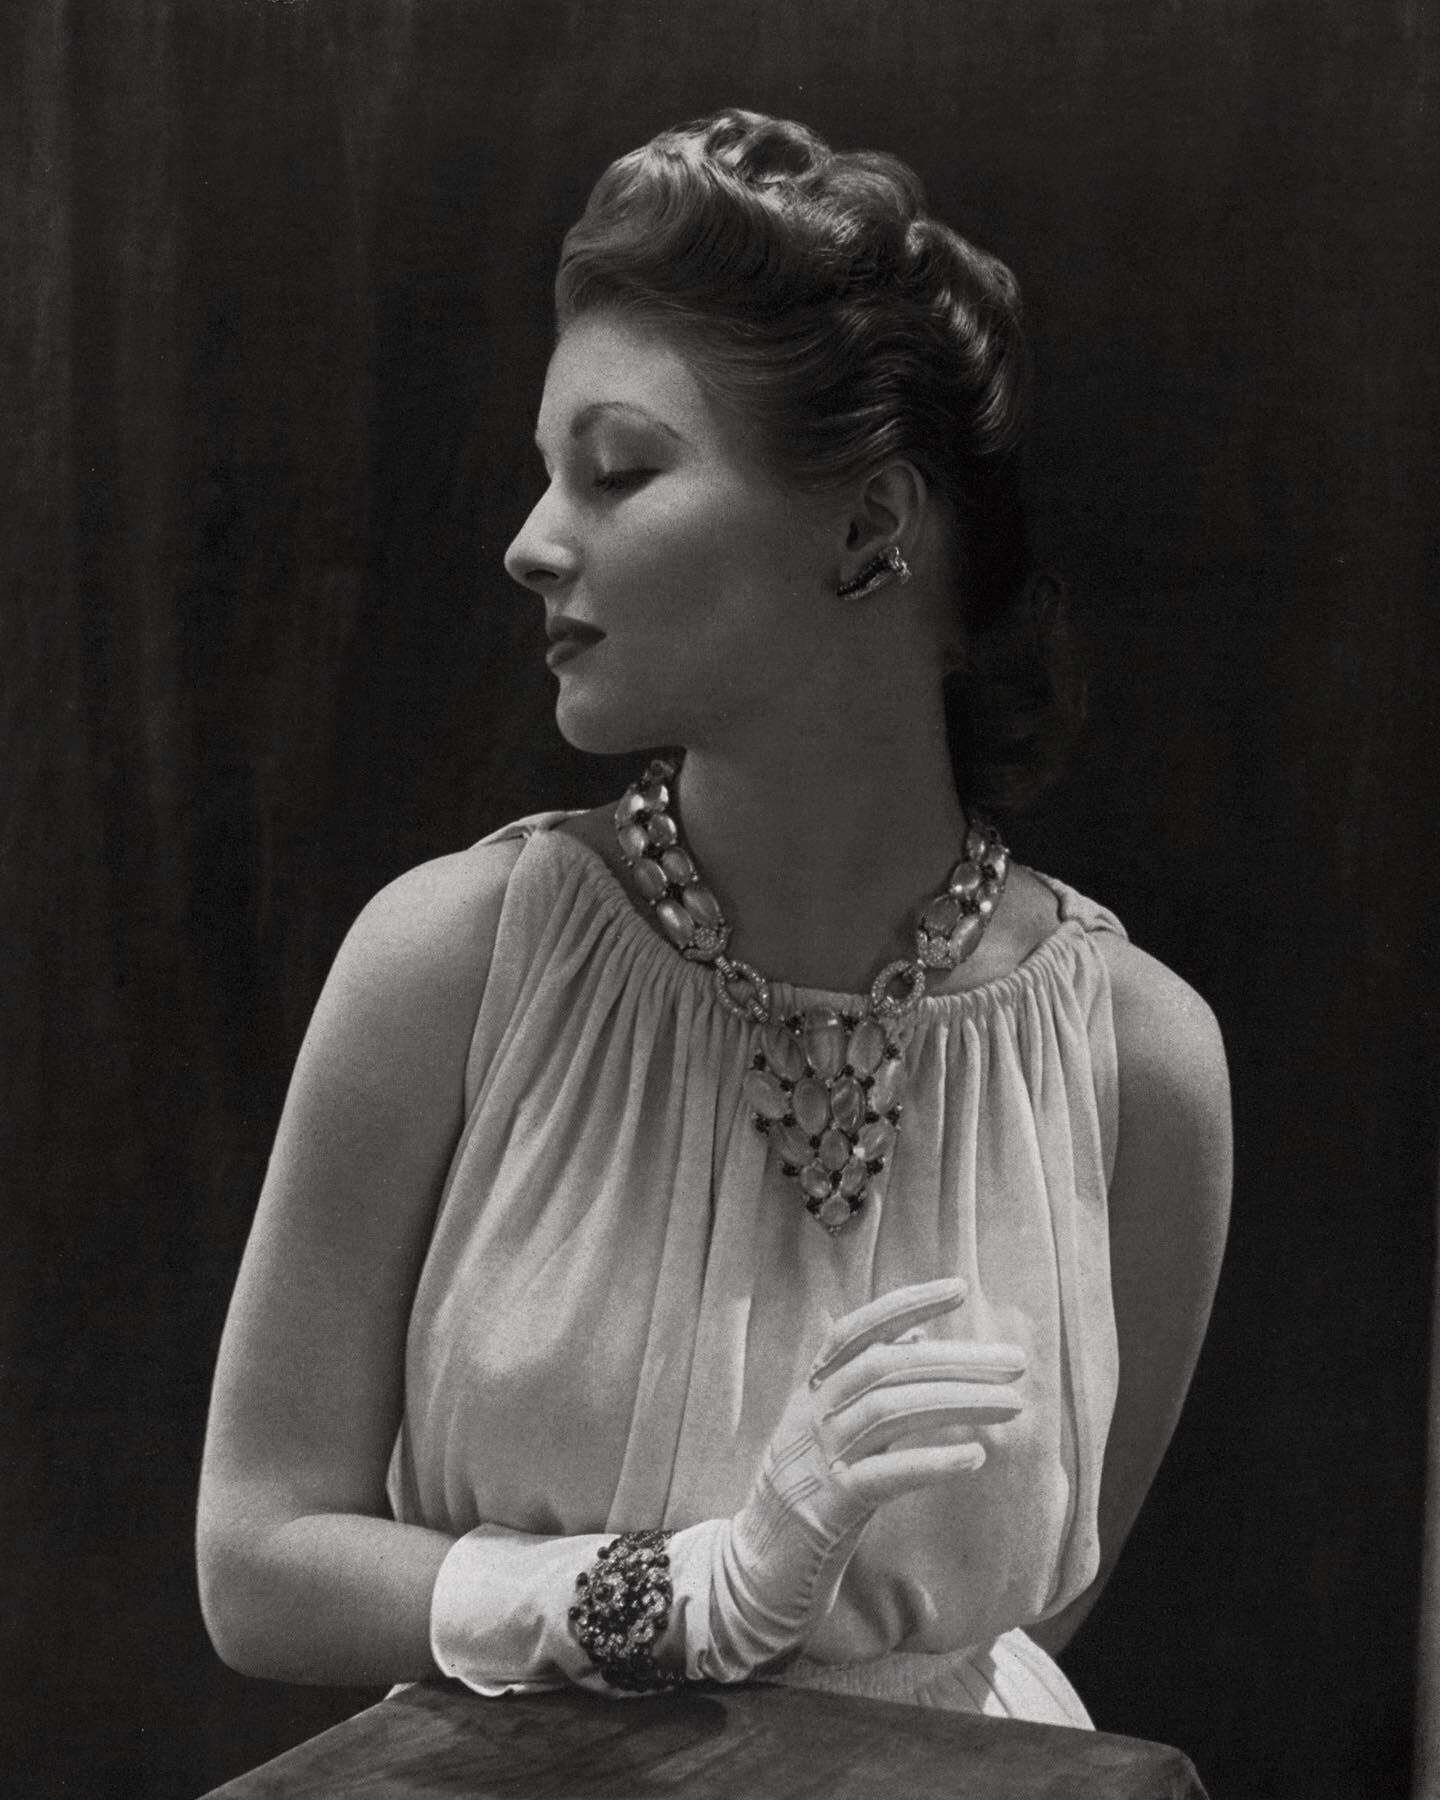 Model wearing a luminous Flato necklace of moonstone, ruby, diamond, &amp; platinum paired with Flato earclips and bracelet of diamond, ruby, &amp; platinum. 

Photograph by Edward Steichen. Vogue, October 1939.